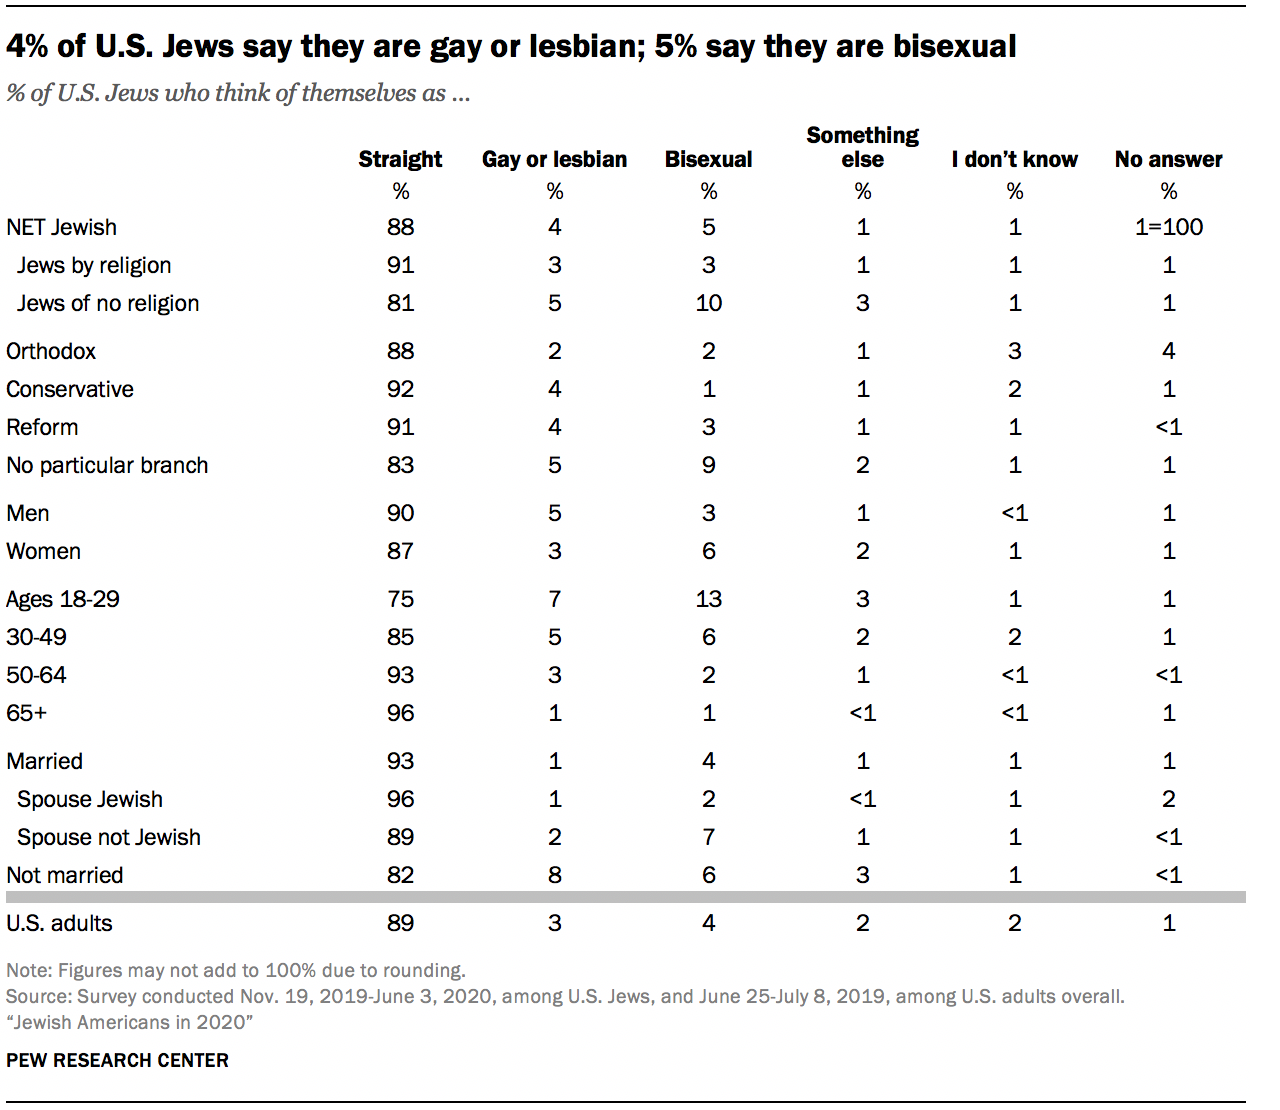 4% of U.S. Jews say they are gay or lesbian; 5% say they are bisexual